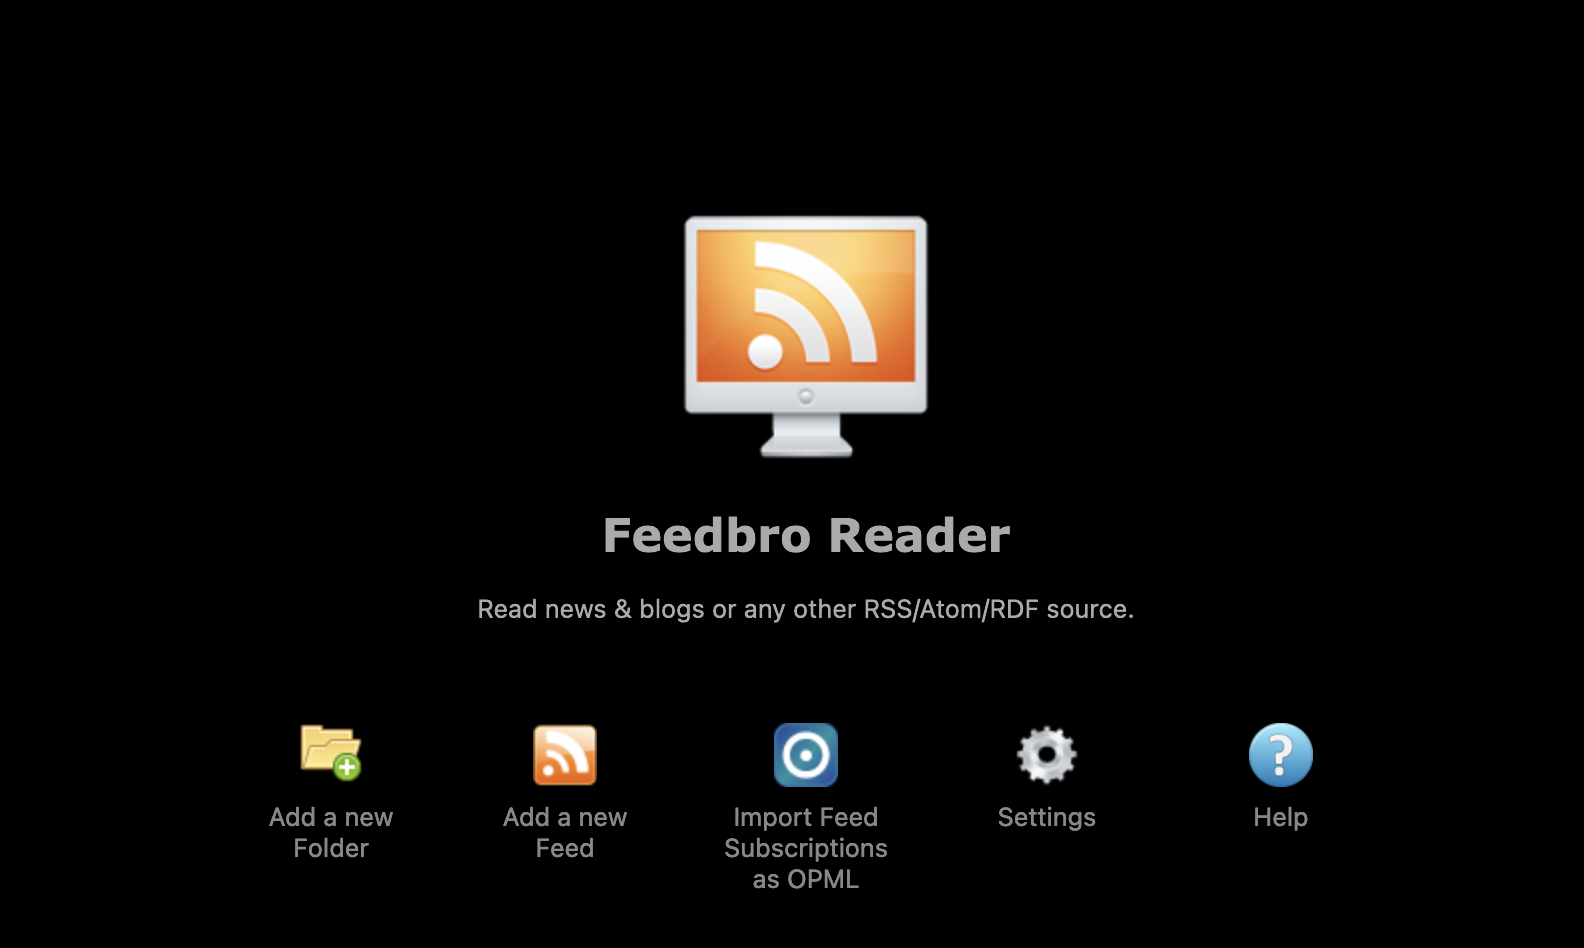 Screen shot of the image you see when you open up the Feedbro Reader extension for Firefox. It's against a black background, and has a digital graphic of a computer with an rss feed symbol on the computer's screen. Below it are icons with links such as adding a new folder, adding a new feed, importing feed subscriptions, settings, and a help section.